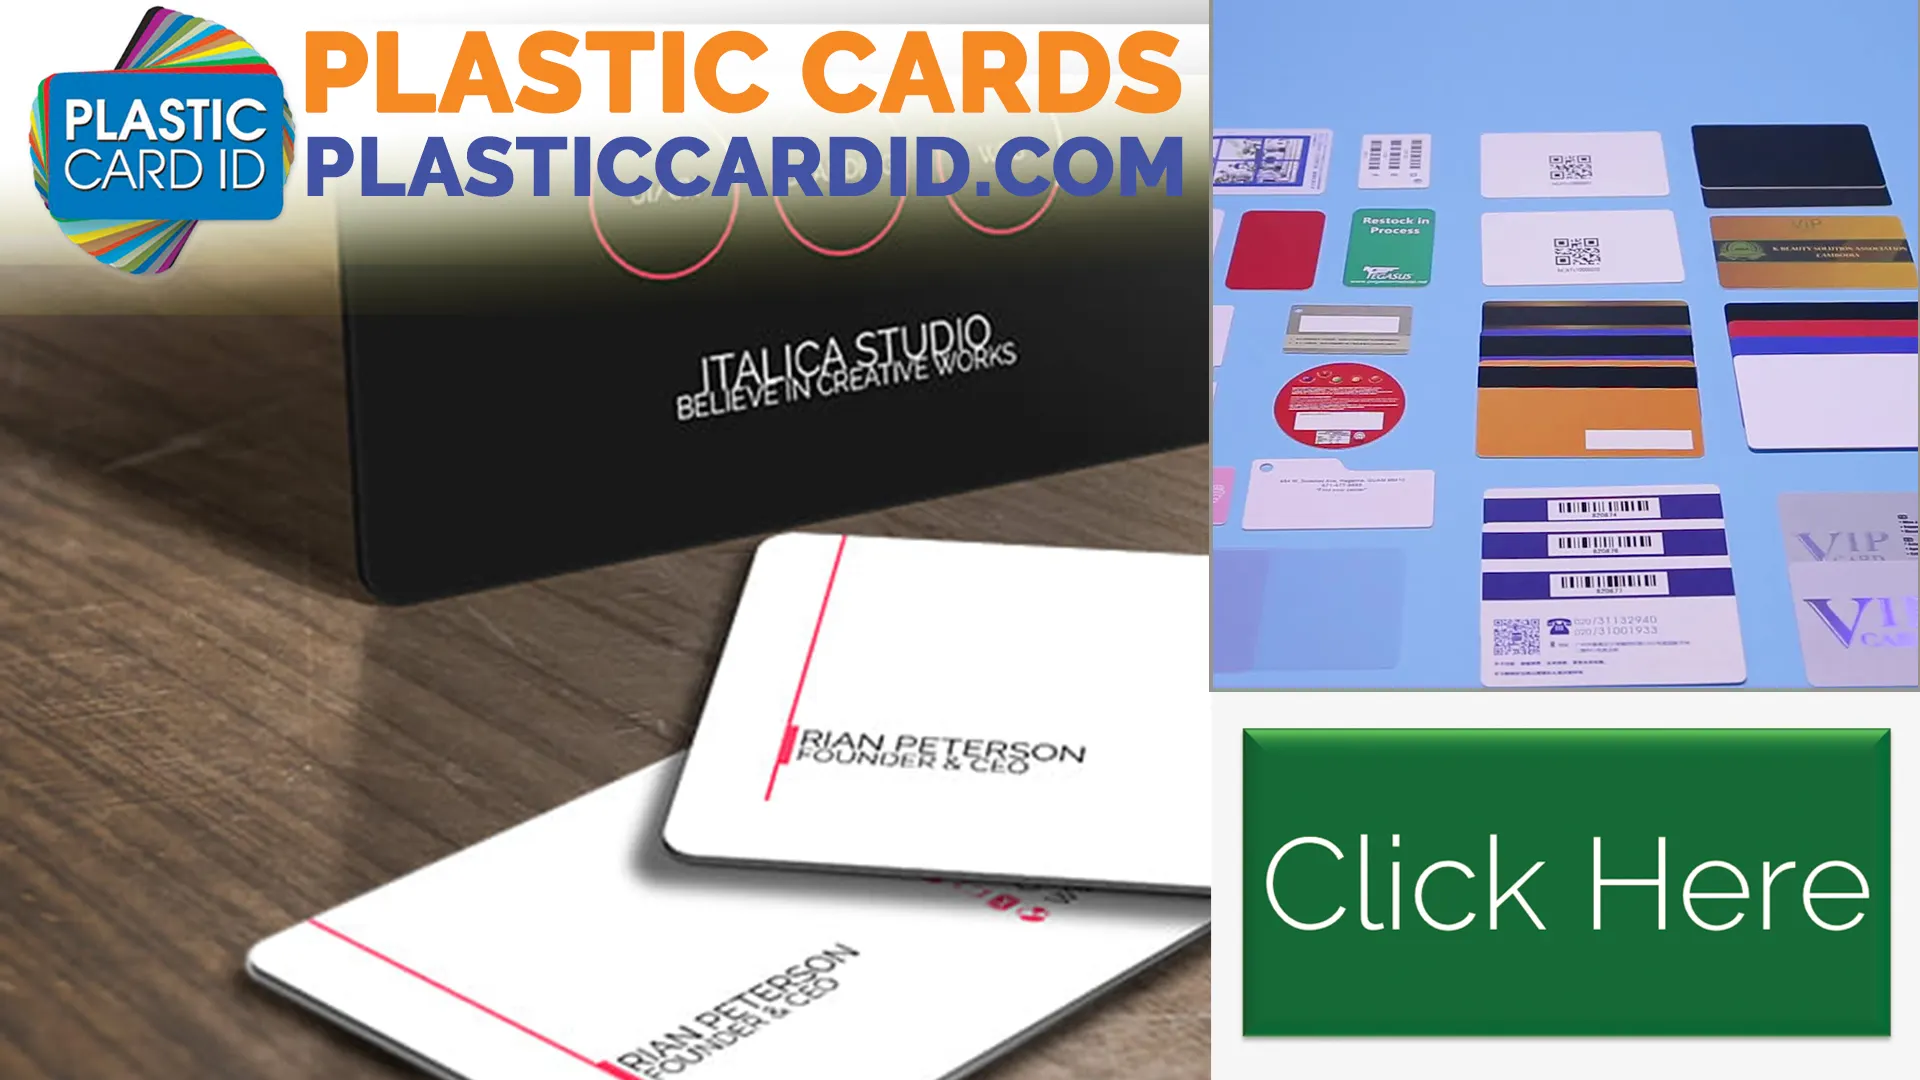 Discover the Benefits of Plastic Cards for Businesses and Individuals Alike